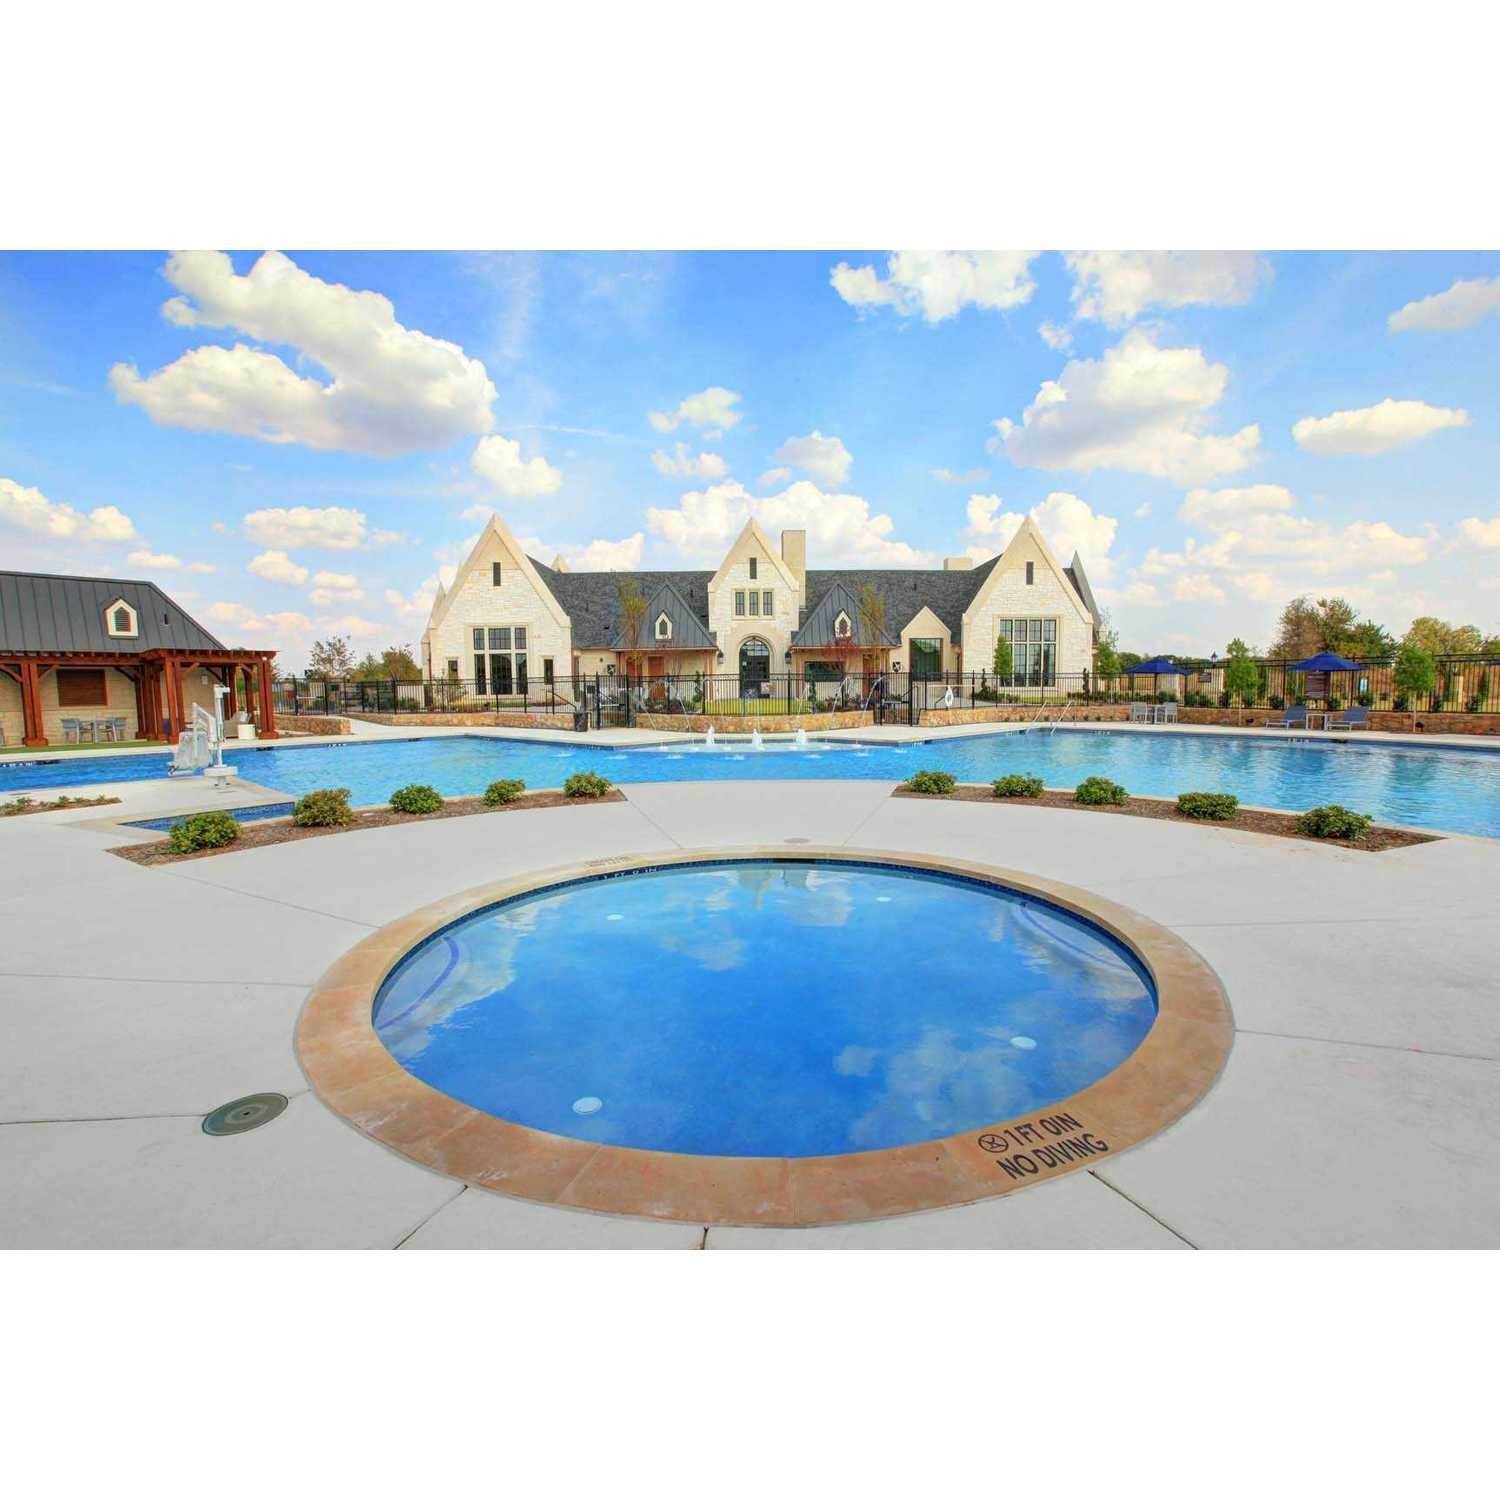 39. Cambridge Crossing 40ft. lots xây dựng tại 2237 Pinner Court, Frisco, TX 75035